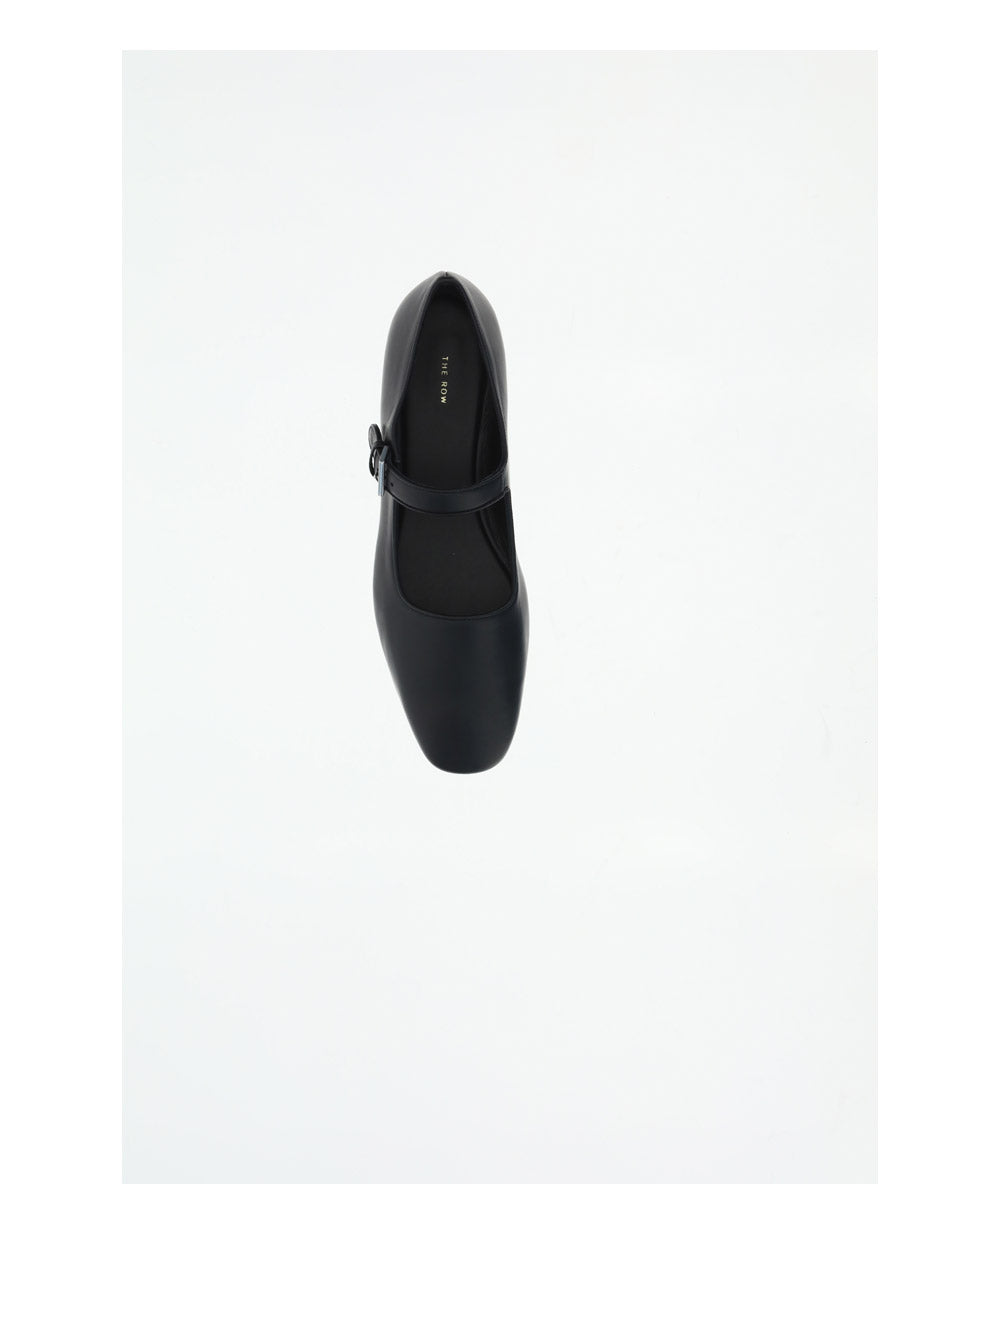 Ava Shoe in Leather - Black